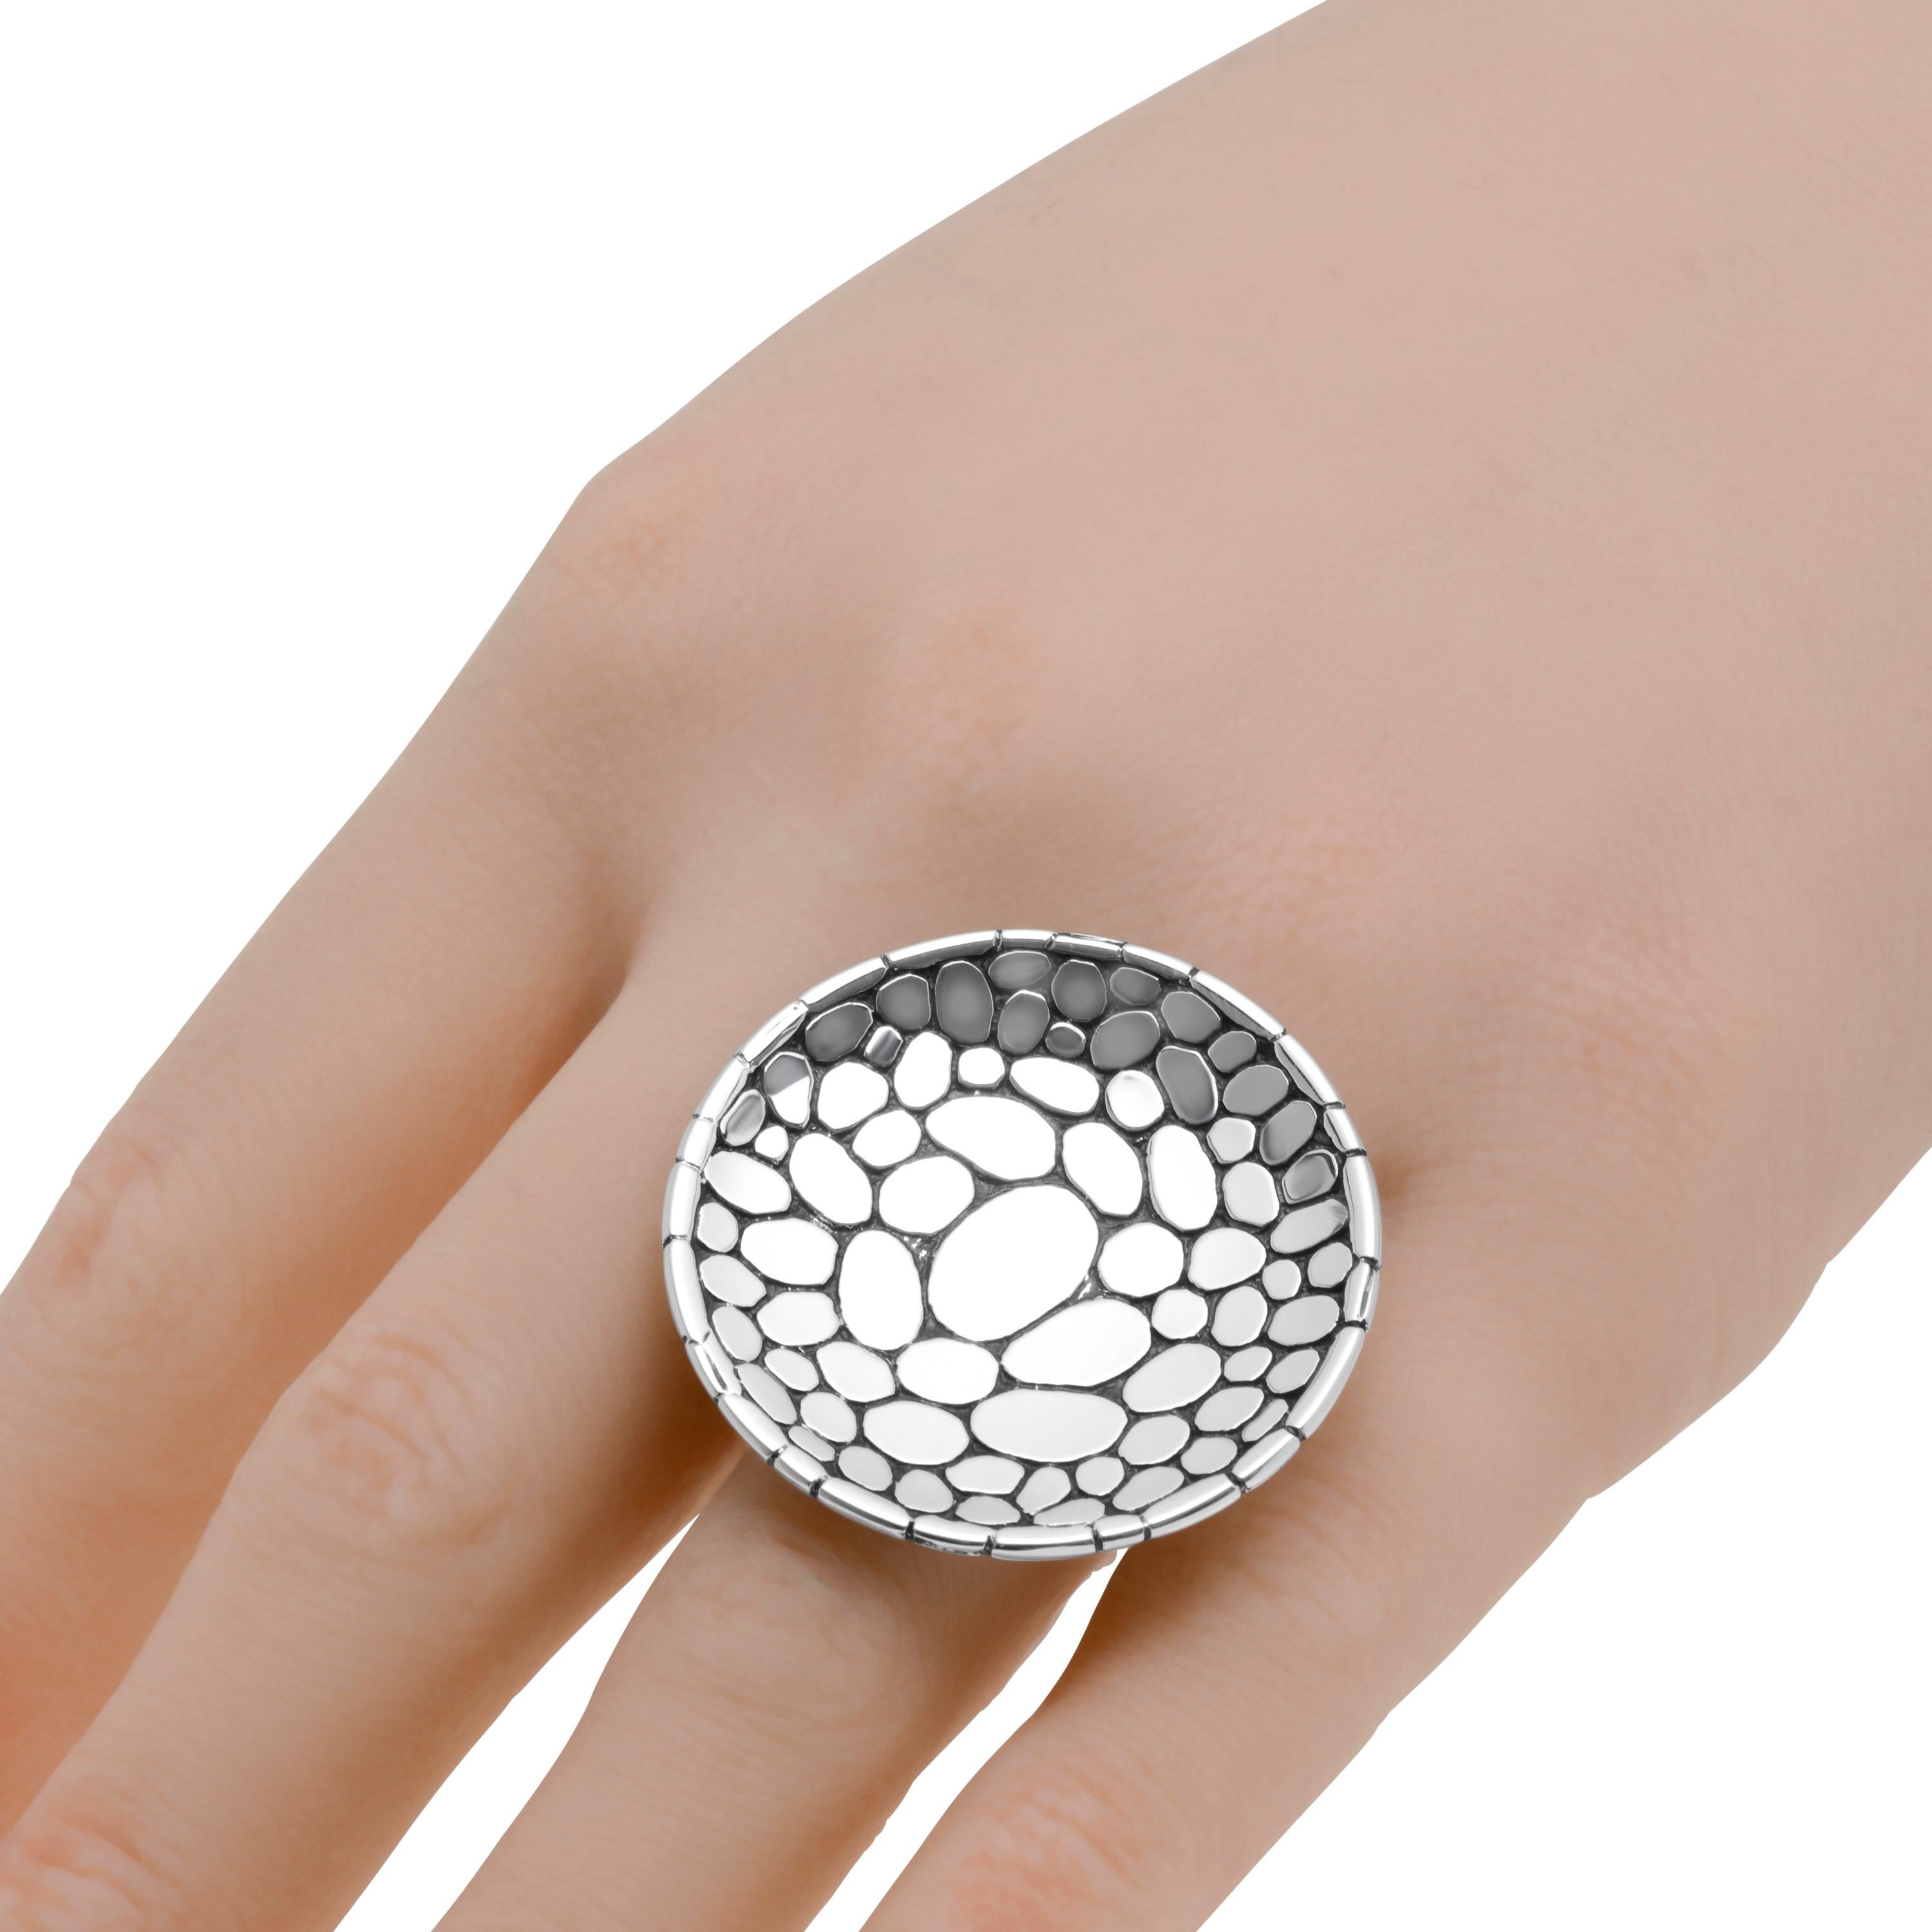 This bold John Hardy Sterling Silver Statement Ring features a hand carved pebble design lining a decorative circle. Primarily inspired by jewelry making traditions in Bali, John Hardy is celebrated for handcrafted and one-of-a-kind collections that